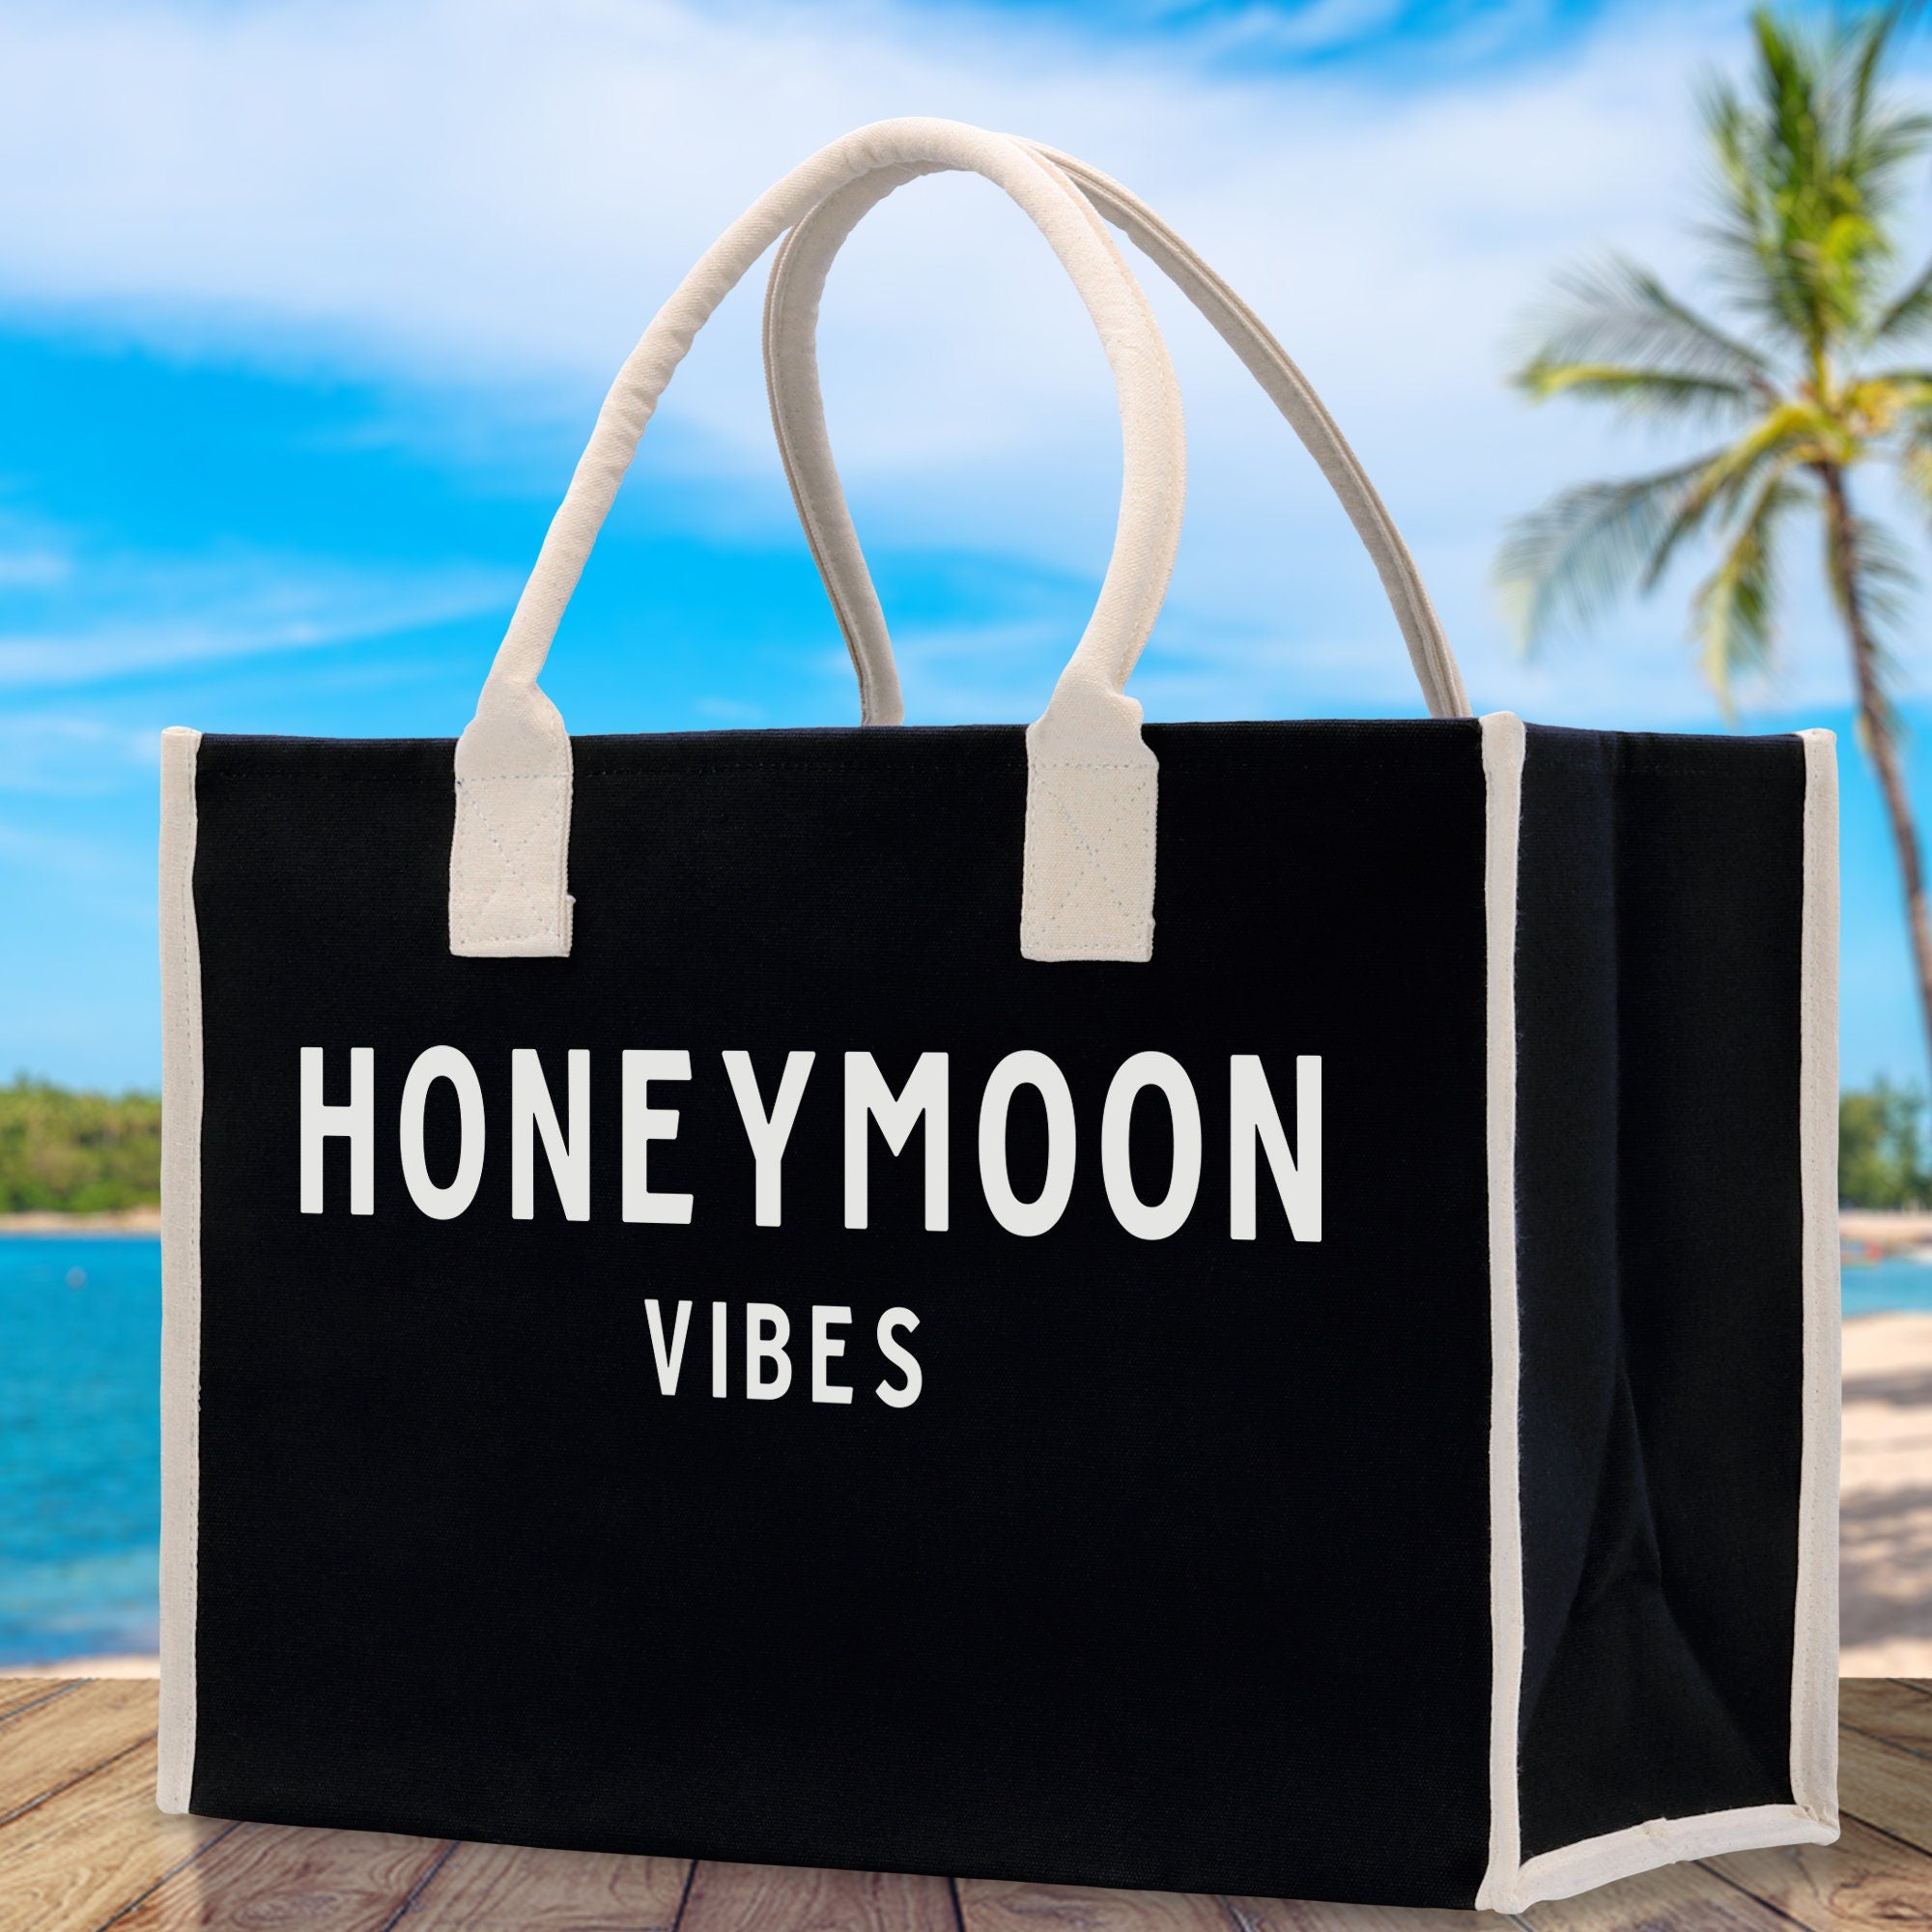 Honeymoon Vibes Cotton Canvas Chic Beach Tote Bag Multipurpose Tote Weekender Tote Gift for Her Outdoor Tote Vacation Tote Large Beach Bag